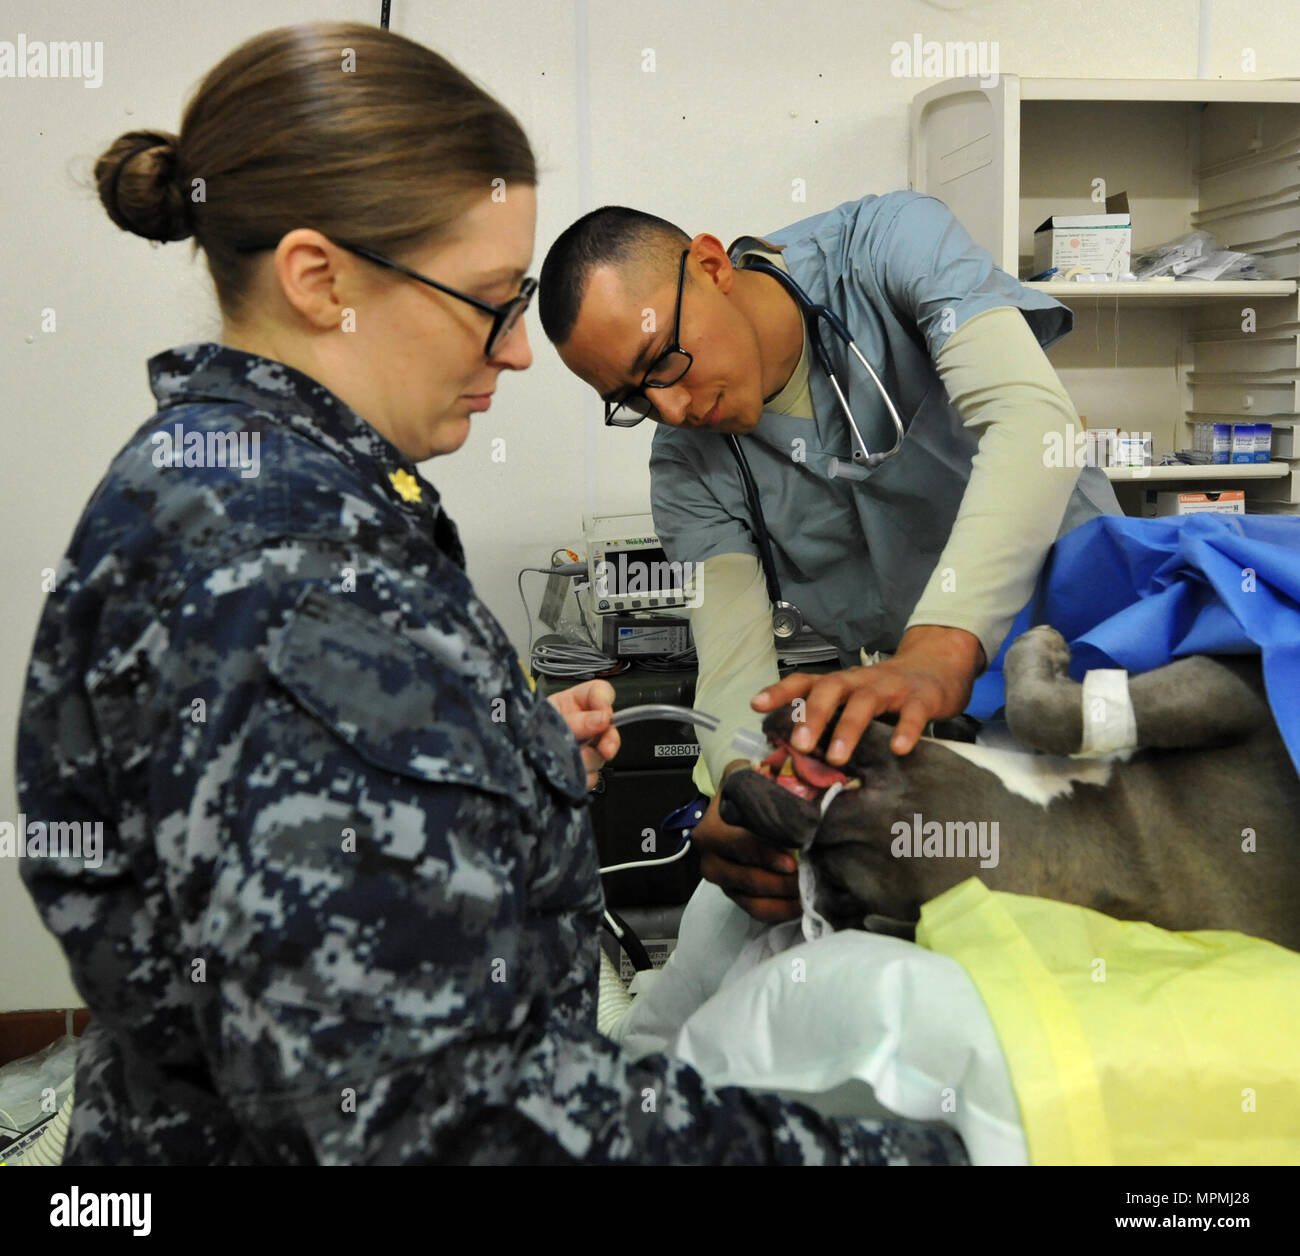 Navy Lt. Cmdr. Megan Debus, assistant officer in charge of the Kodiak Clinic and Army Veterinary Technician Specialist Edwardo Macias with the 109th Veterinary Services Medical Detachment assists in the spay surgery of a dog on March 31, 2017 on Kodiak Island, Alaska. ARCTIC CARE 2017 is an Office of Secretary of Defense sponsored, Air Force Reserve Command led, training event coordinated with Kodiak Area Native Association (KANA) and civil authorities in Kodiak, Alaska. (U.S. Air Force Photo by Master Sgt. Luke Johnson) Stock Photo